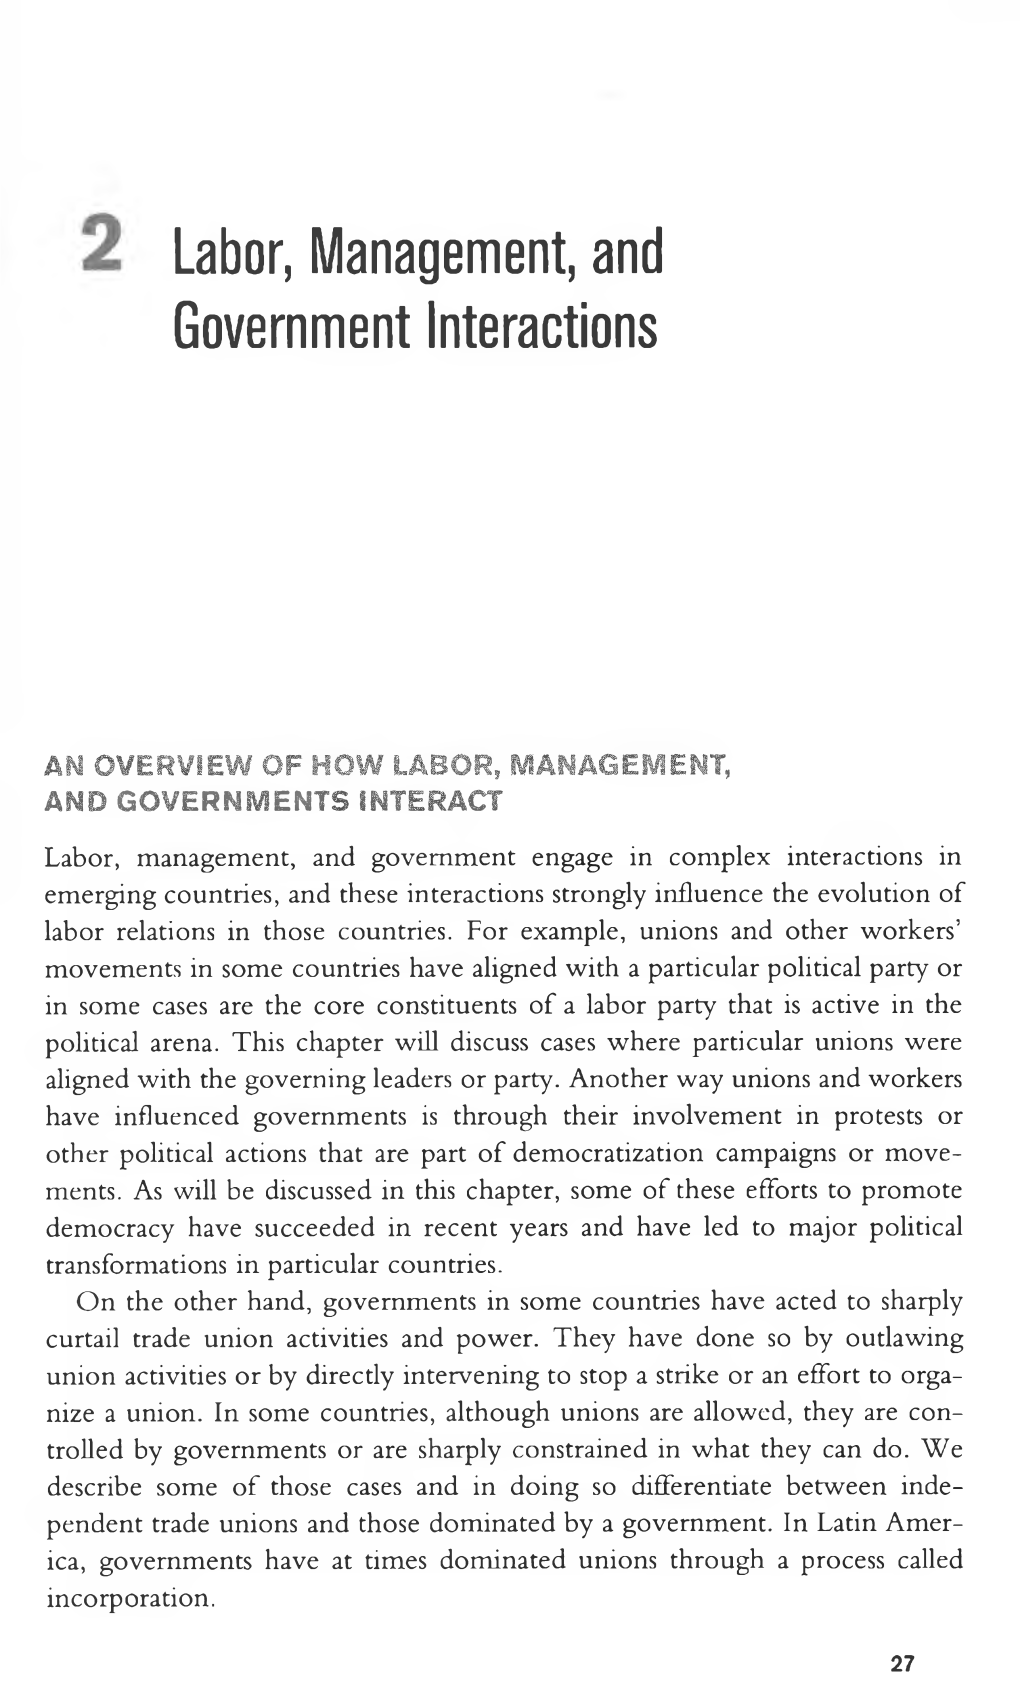 Labor, Management, and Government Interactions